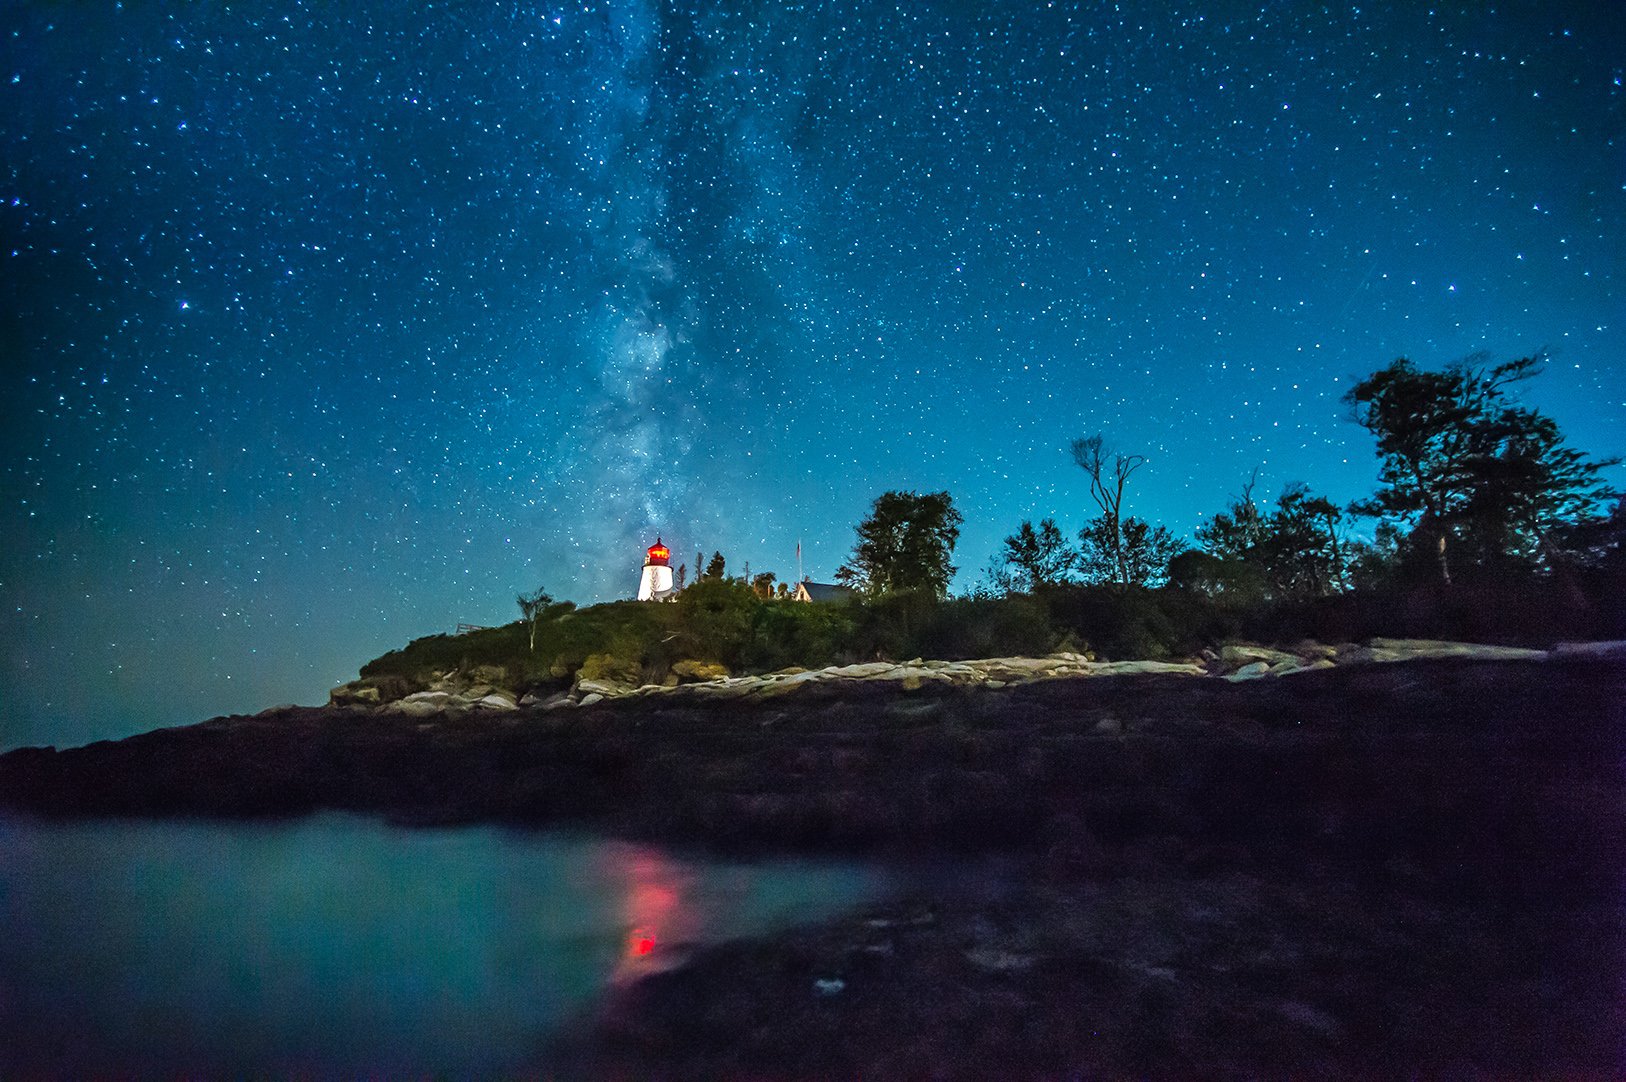 Maine's Burnt Island Lighthouse at night with reflection across water